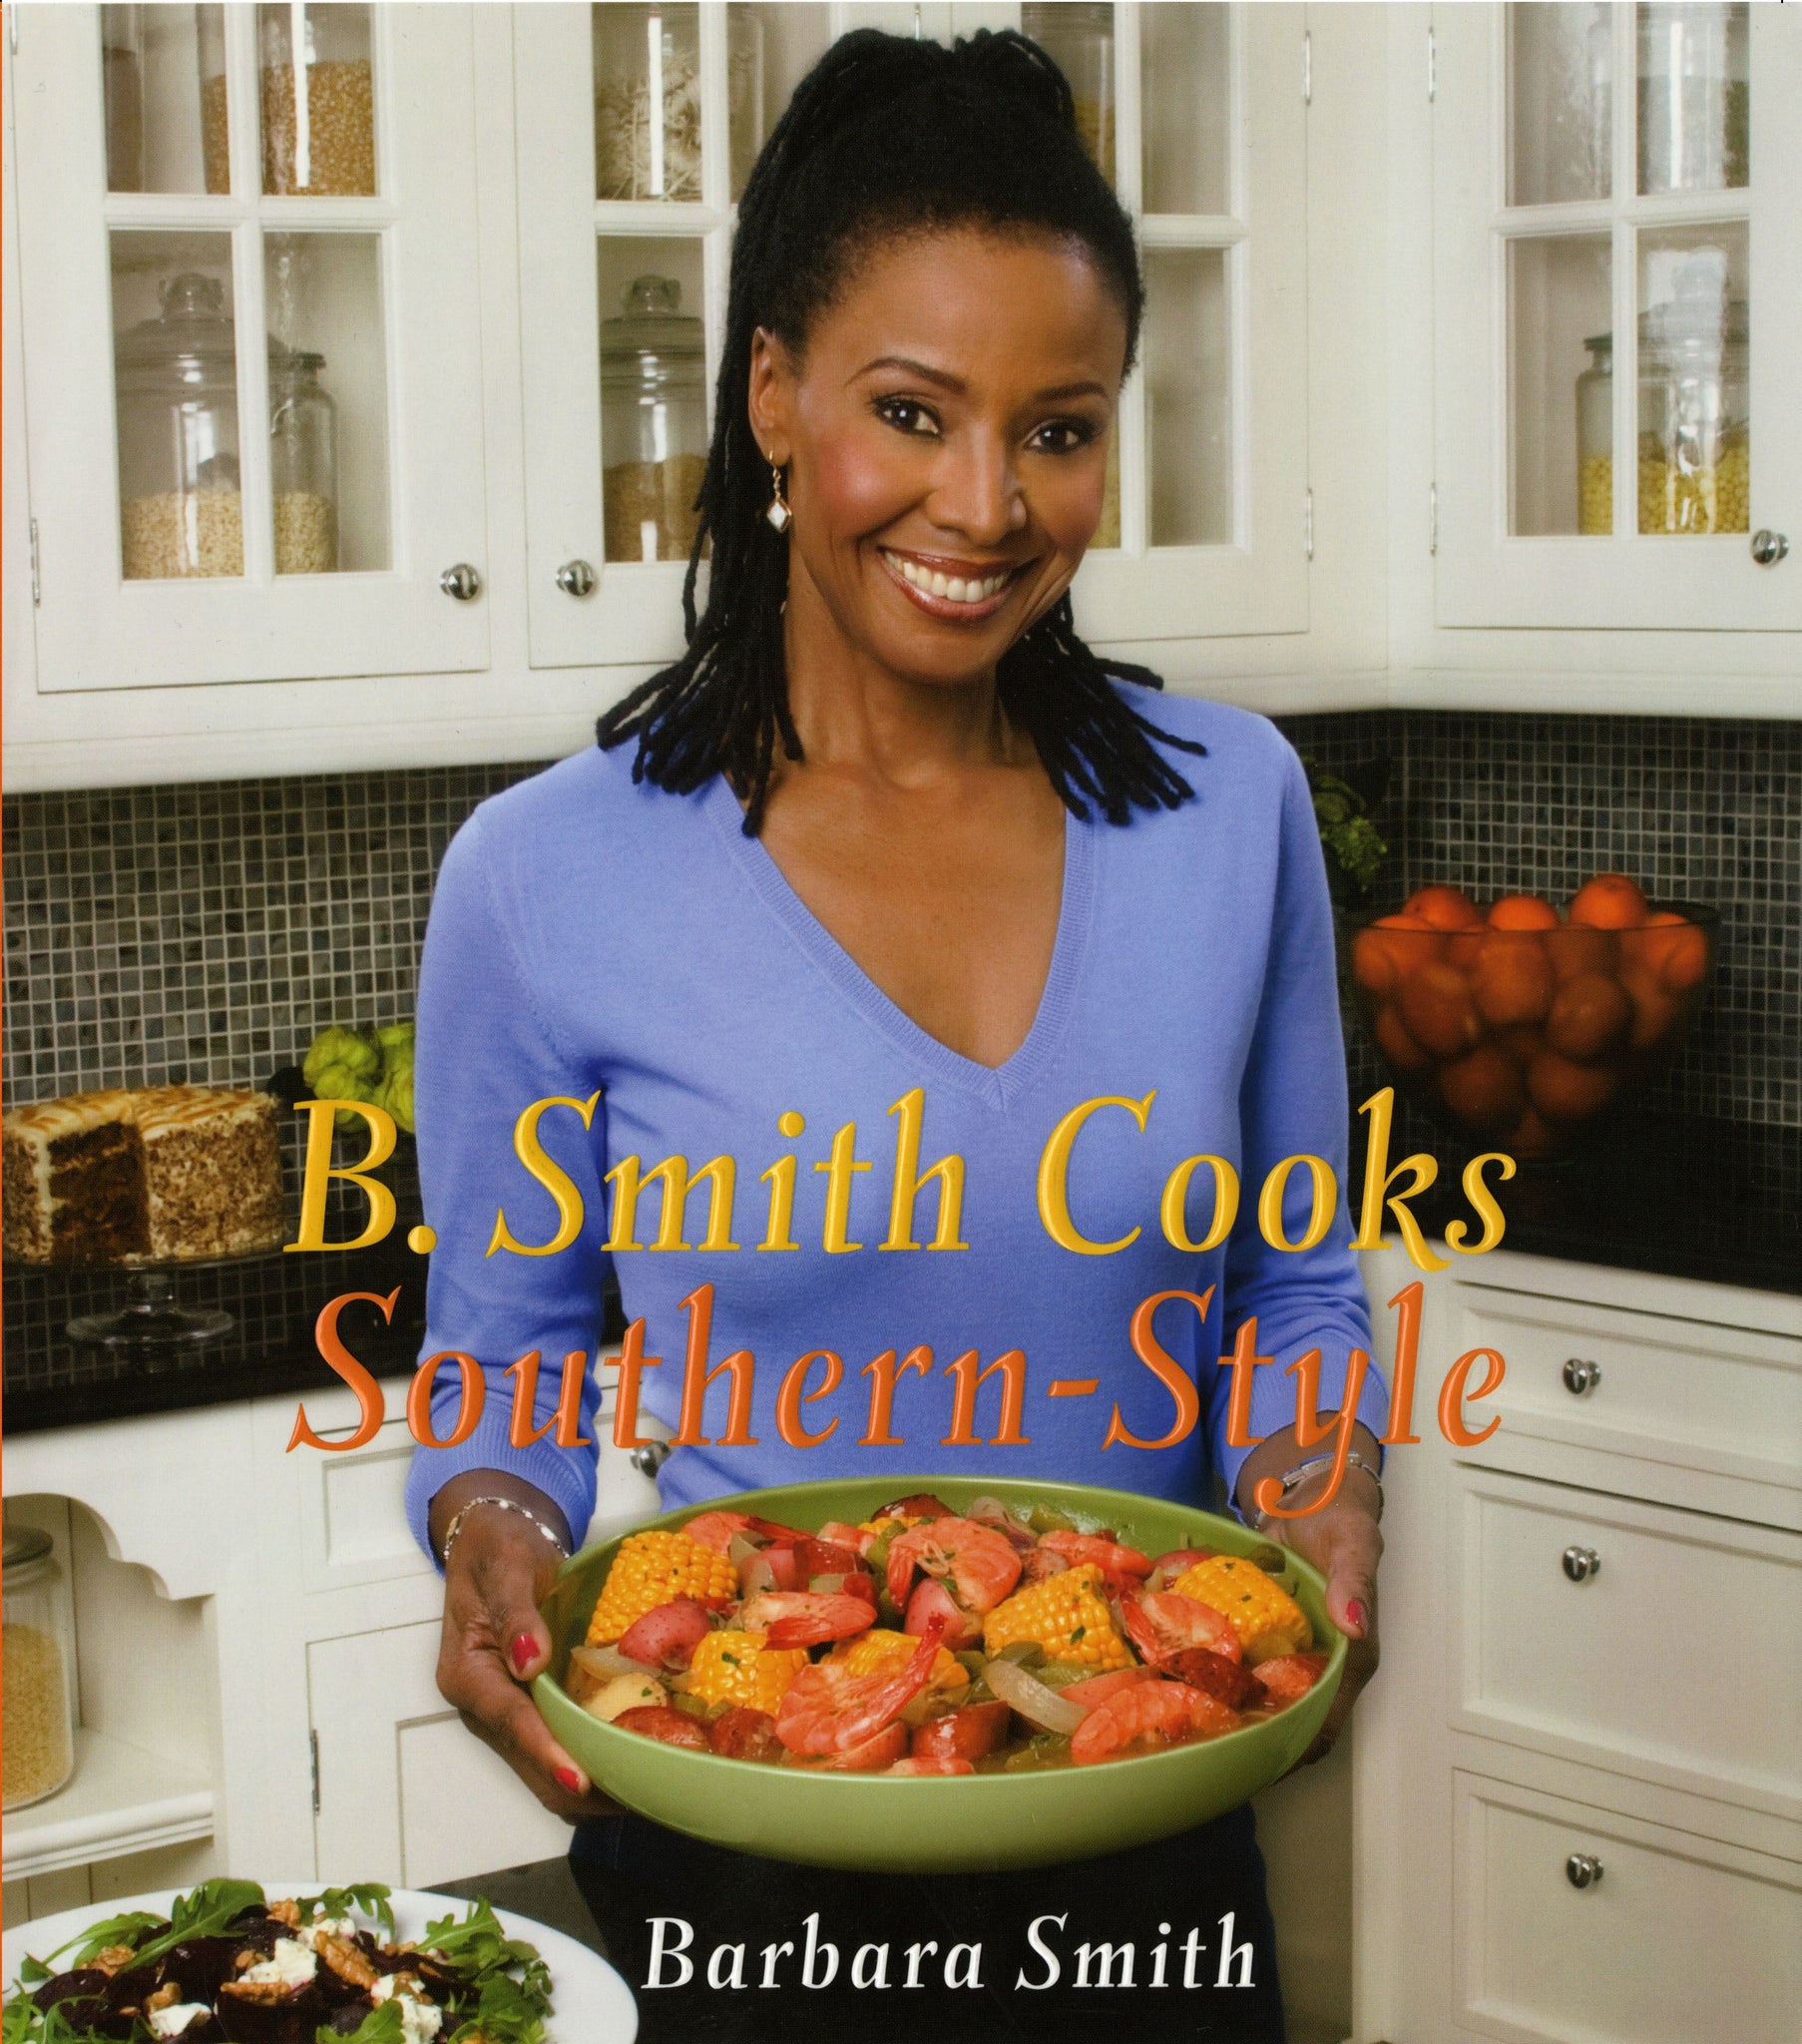 B. Smith Cooks Southern-Style